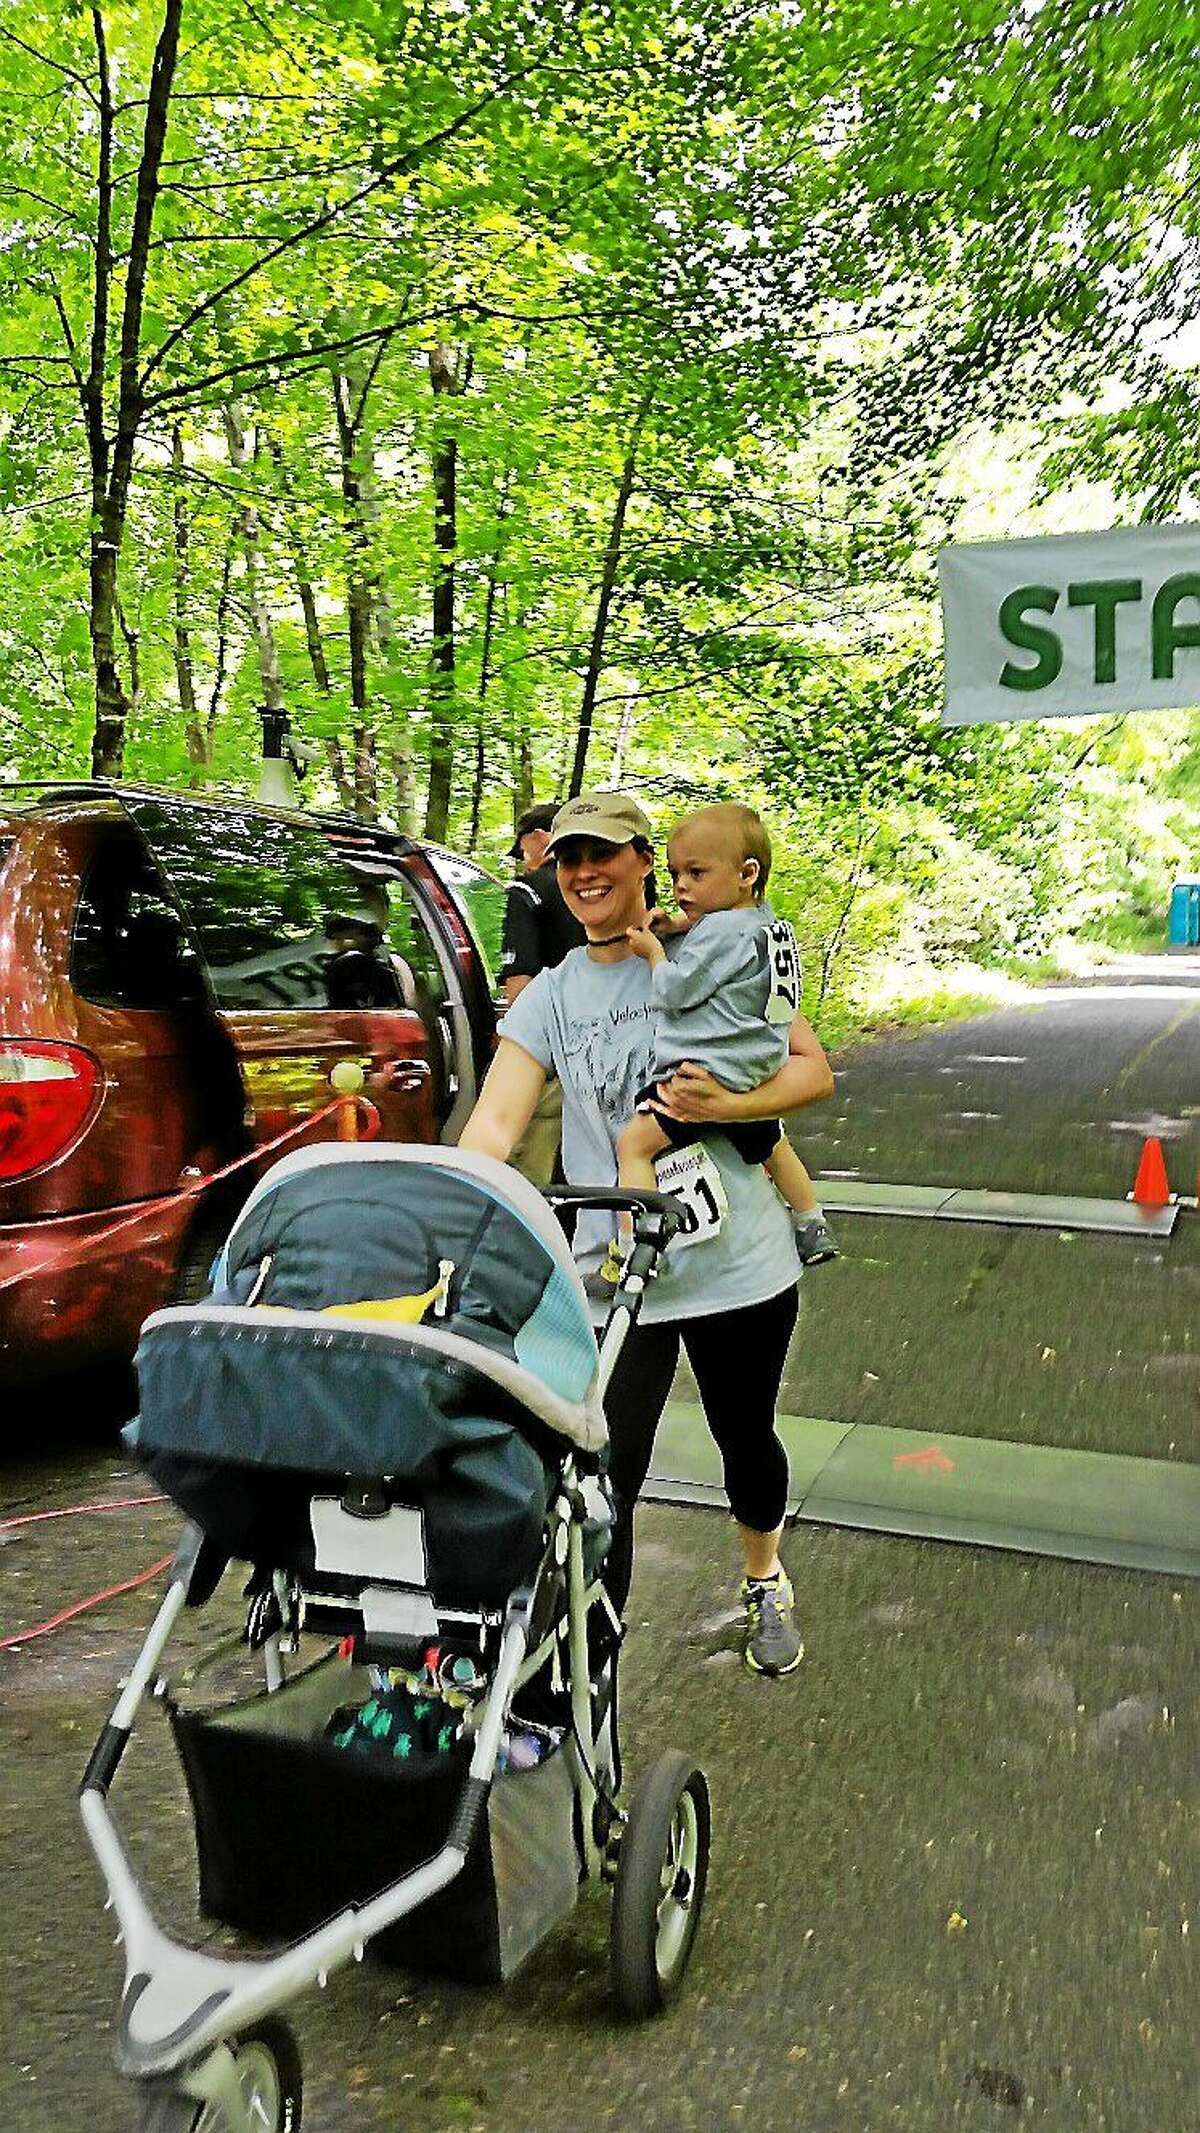 Heather Huebner of Derby came in the finish line while carrying her son Dorian, 2, during Saturday afternoon’s second annual Wheels and Heels 5K Road Race on Valley Road in Harwinton.